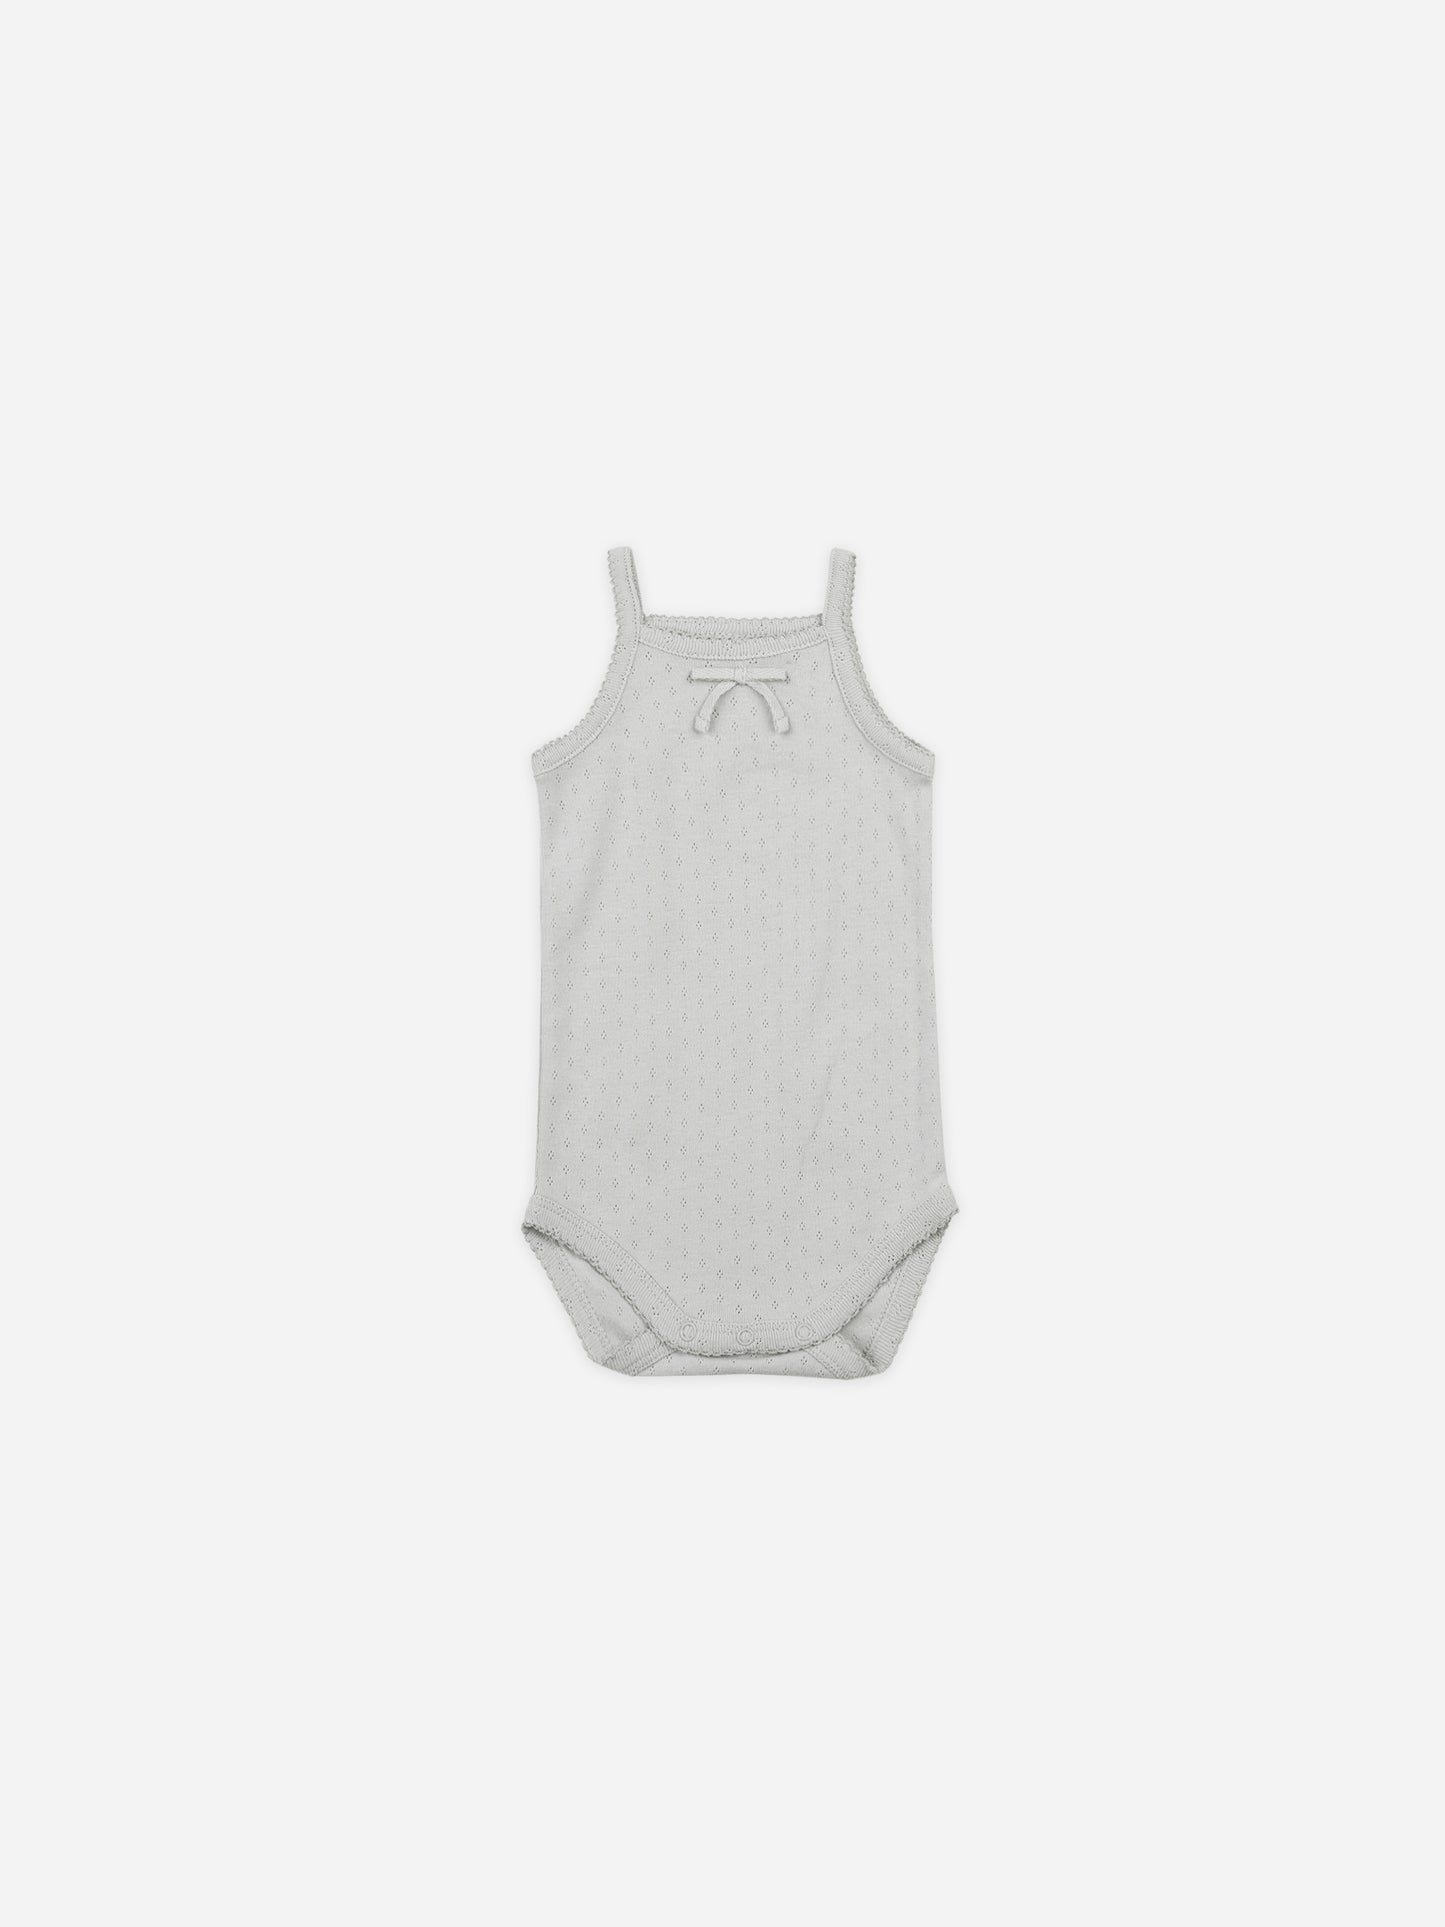 Pointelle Tank Bodysuit || Cloud - Rylee + Cru | Kids Clothes | Trendy Baby Clothes | Modern Infant Outfits |